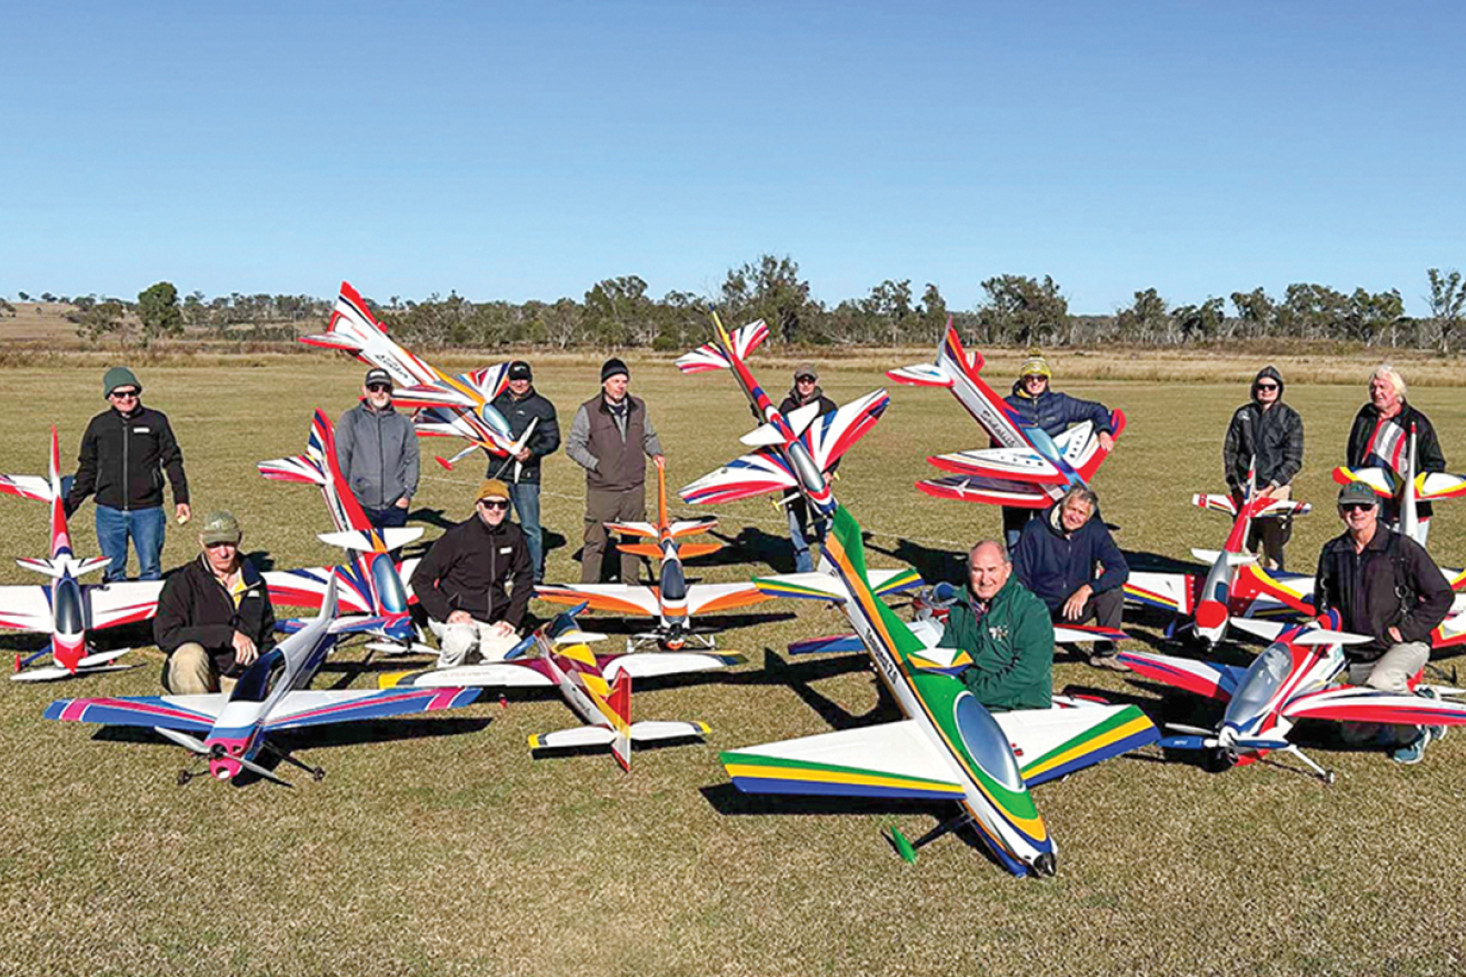 Members of the club enjoy flying a variety of radio controlled model planes either just for fun or in competitions.